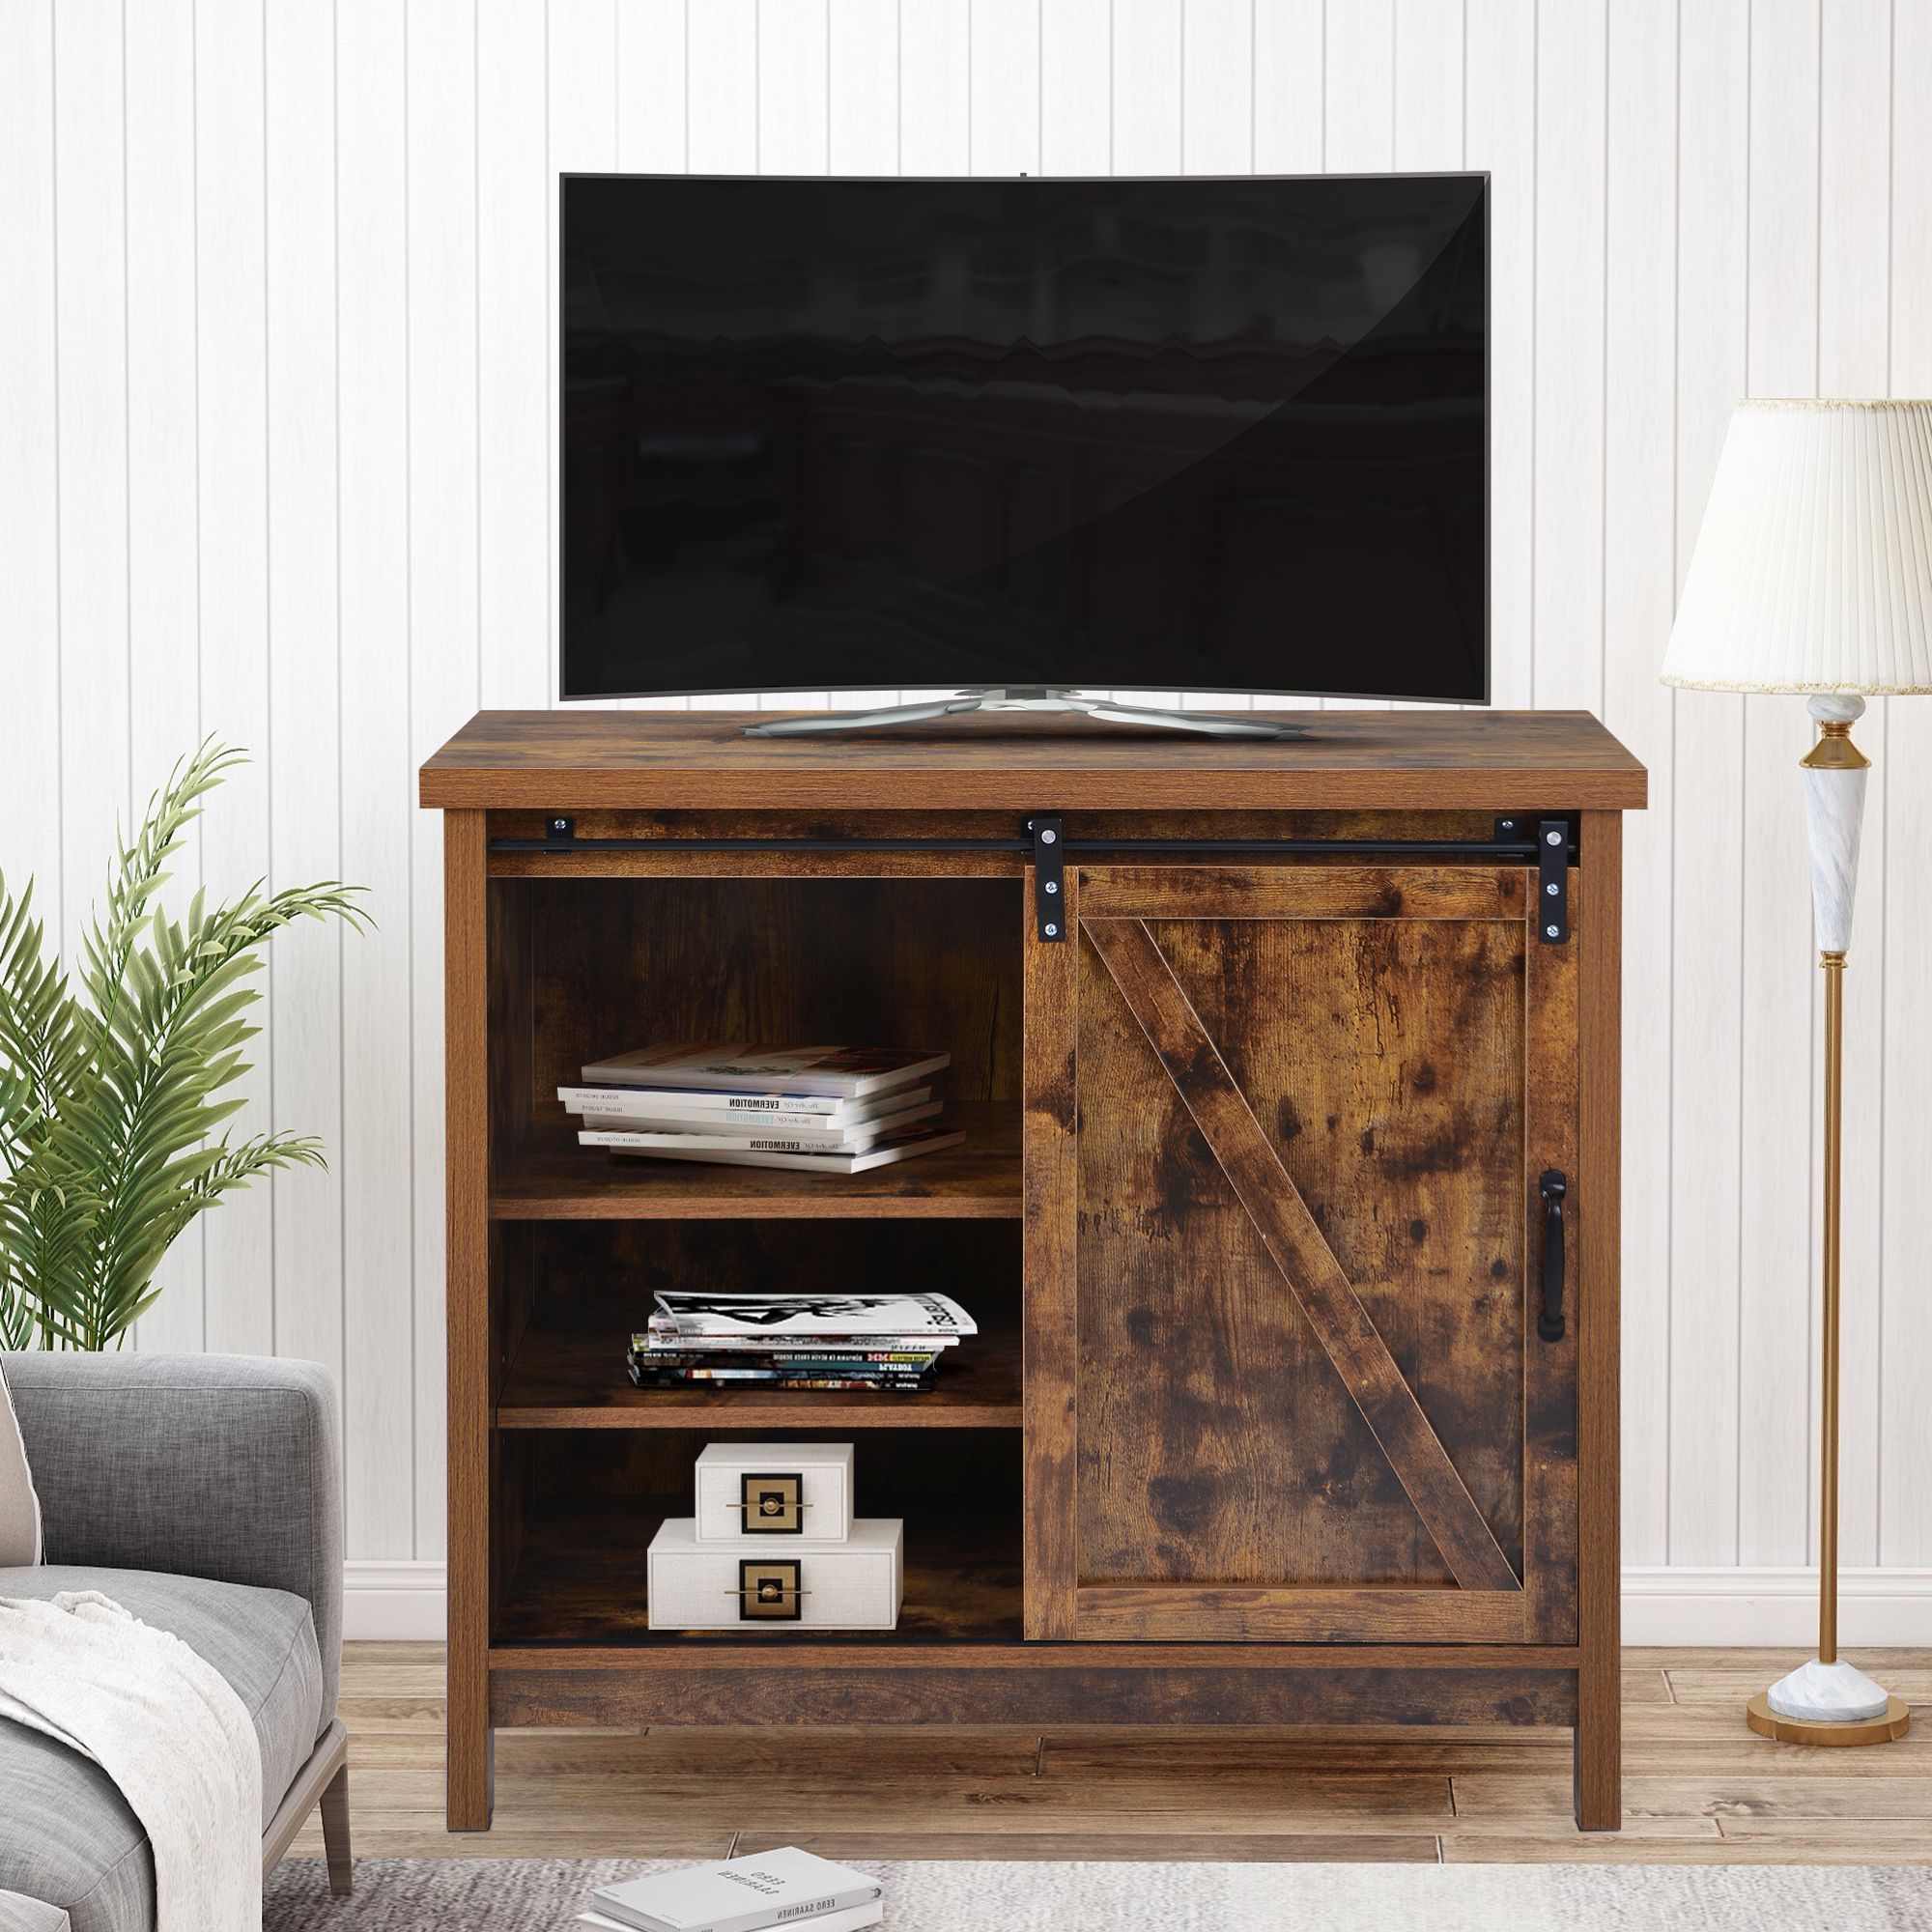 Modern Farmhouse Tv Stand, 2020 New 35 Inch Television Throughout Modern Sliding Door Tv Stands (View 5 of 20)